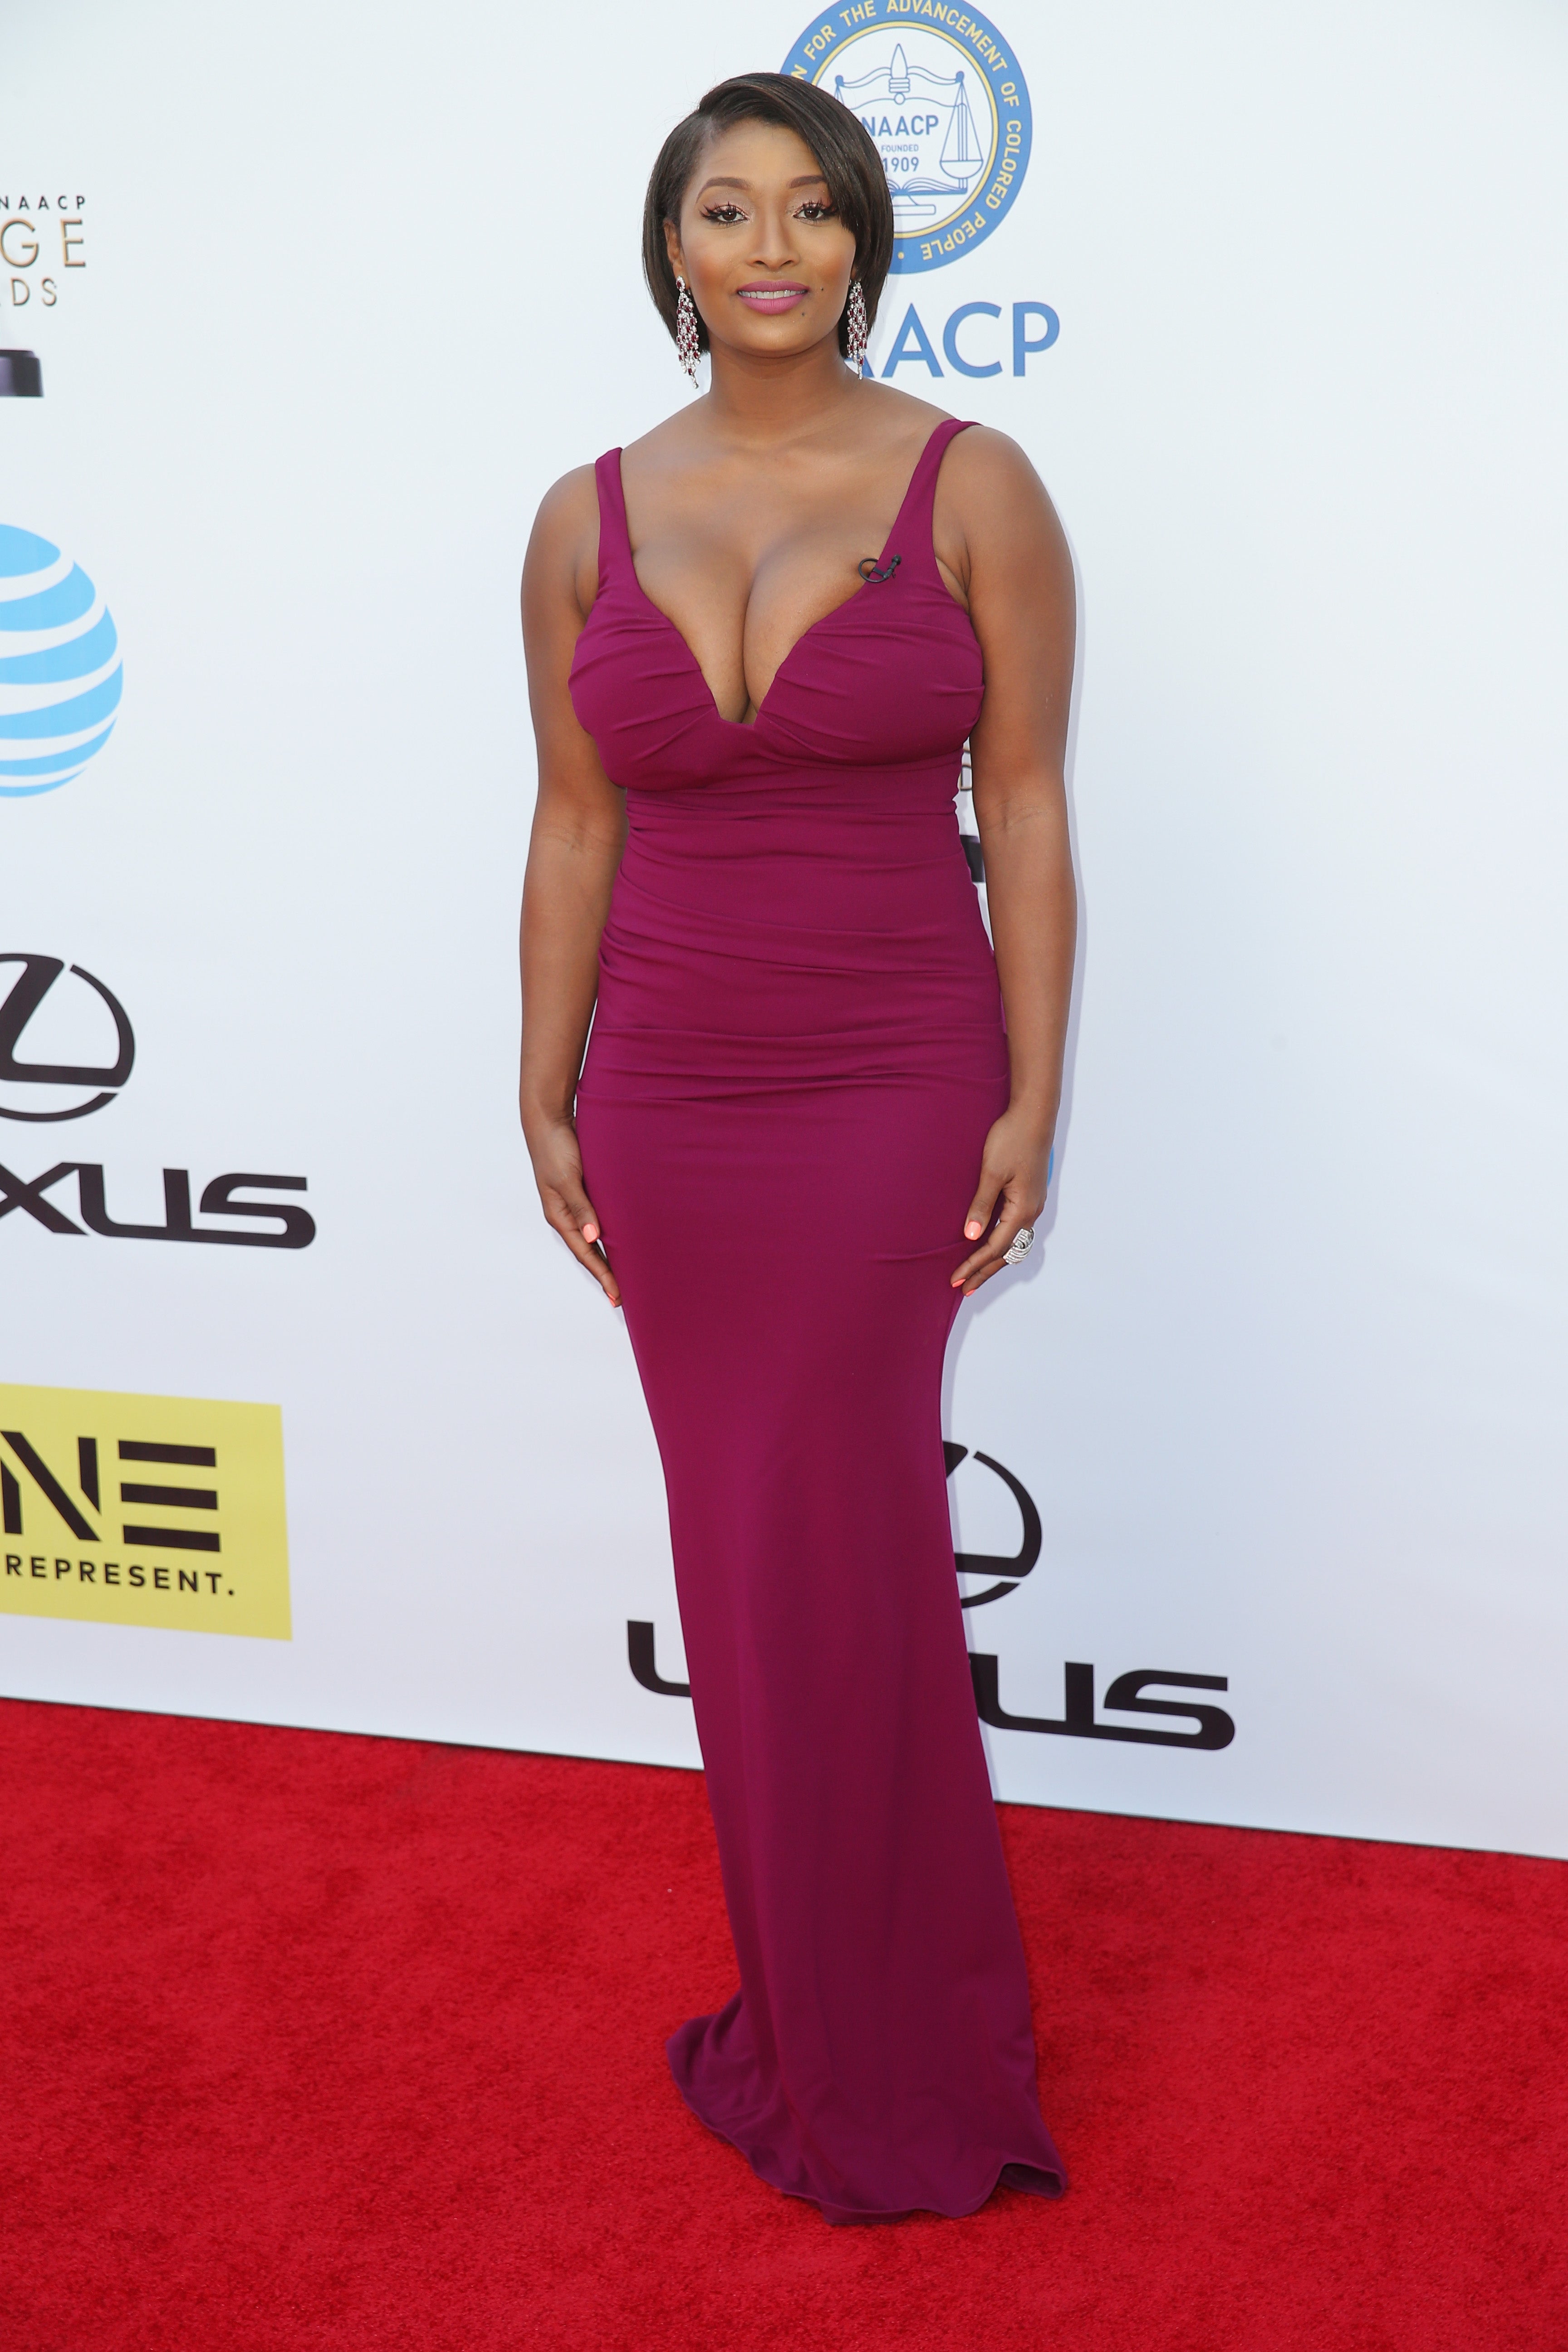 Red Carpet Recap: Black Hollywood Came Through for the NAACP Image Awards
